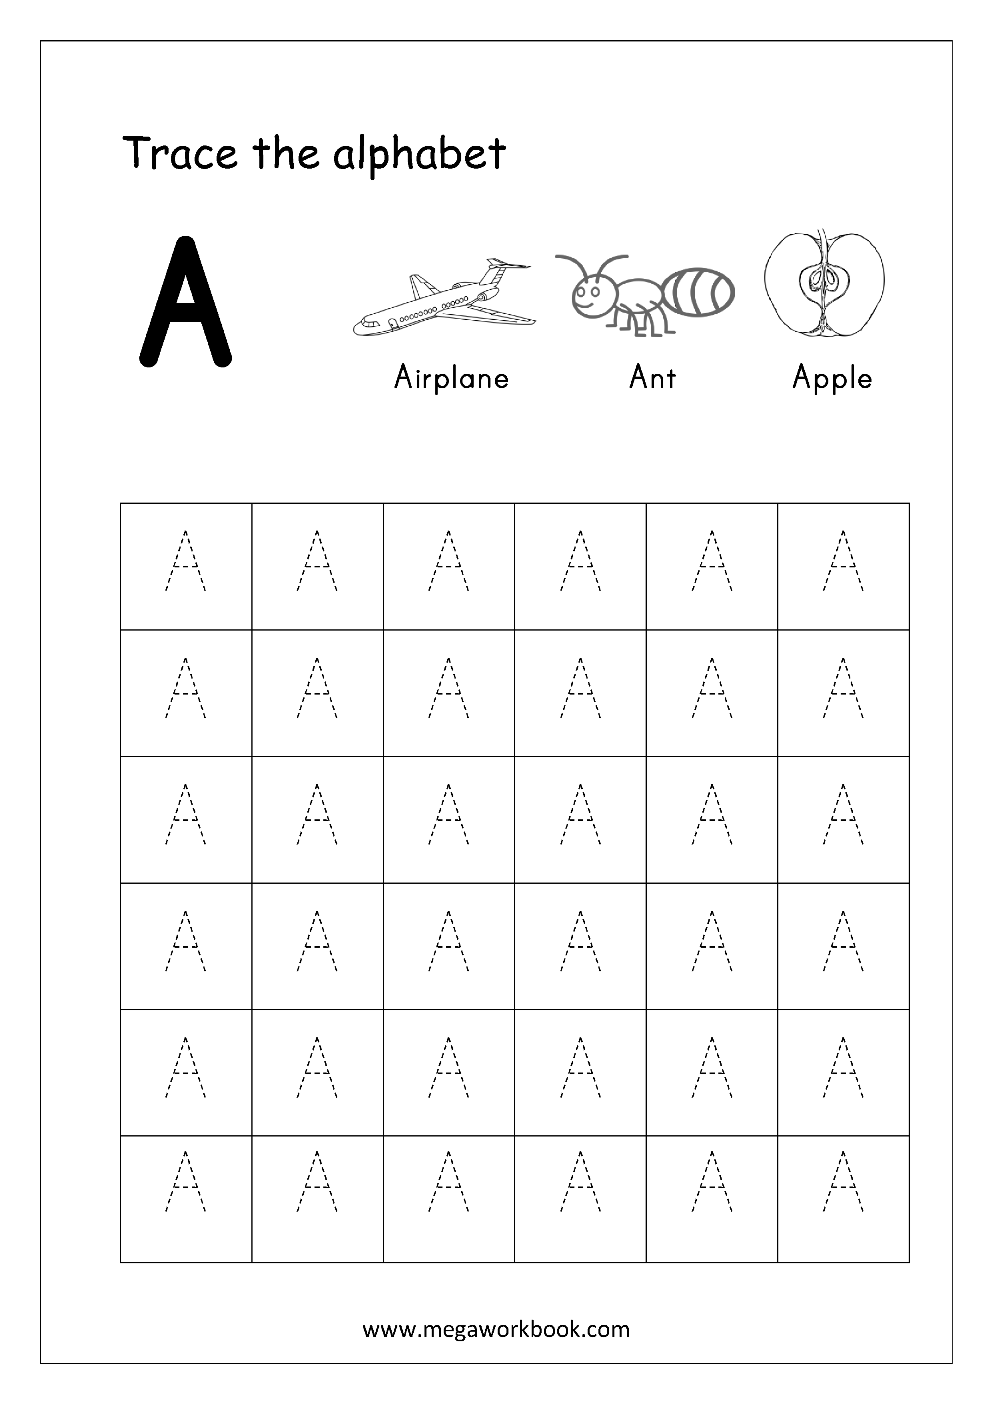 Tracing Letters - Letter Tracing Worksheets - Capital